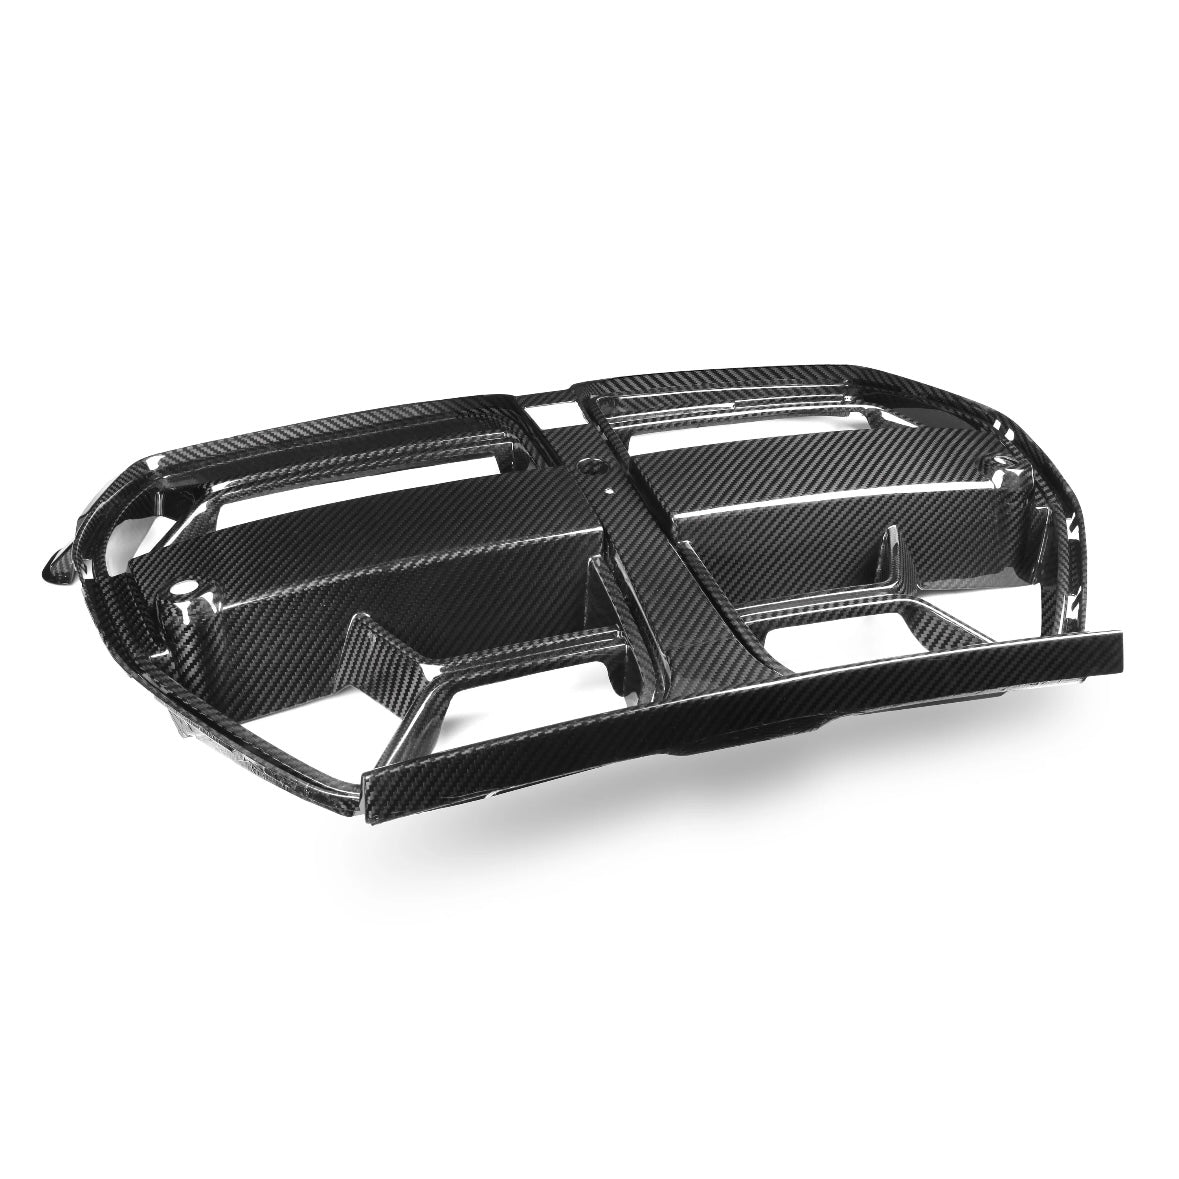 Front grill CSL Style made of PrePreg Carbon for BMW M3/M4 (G80/G81/G82/G83)